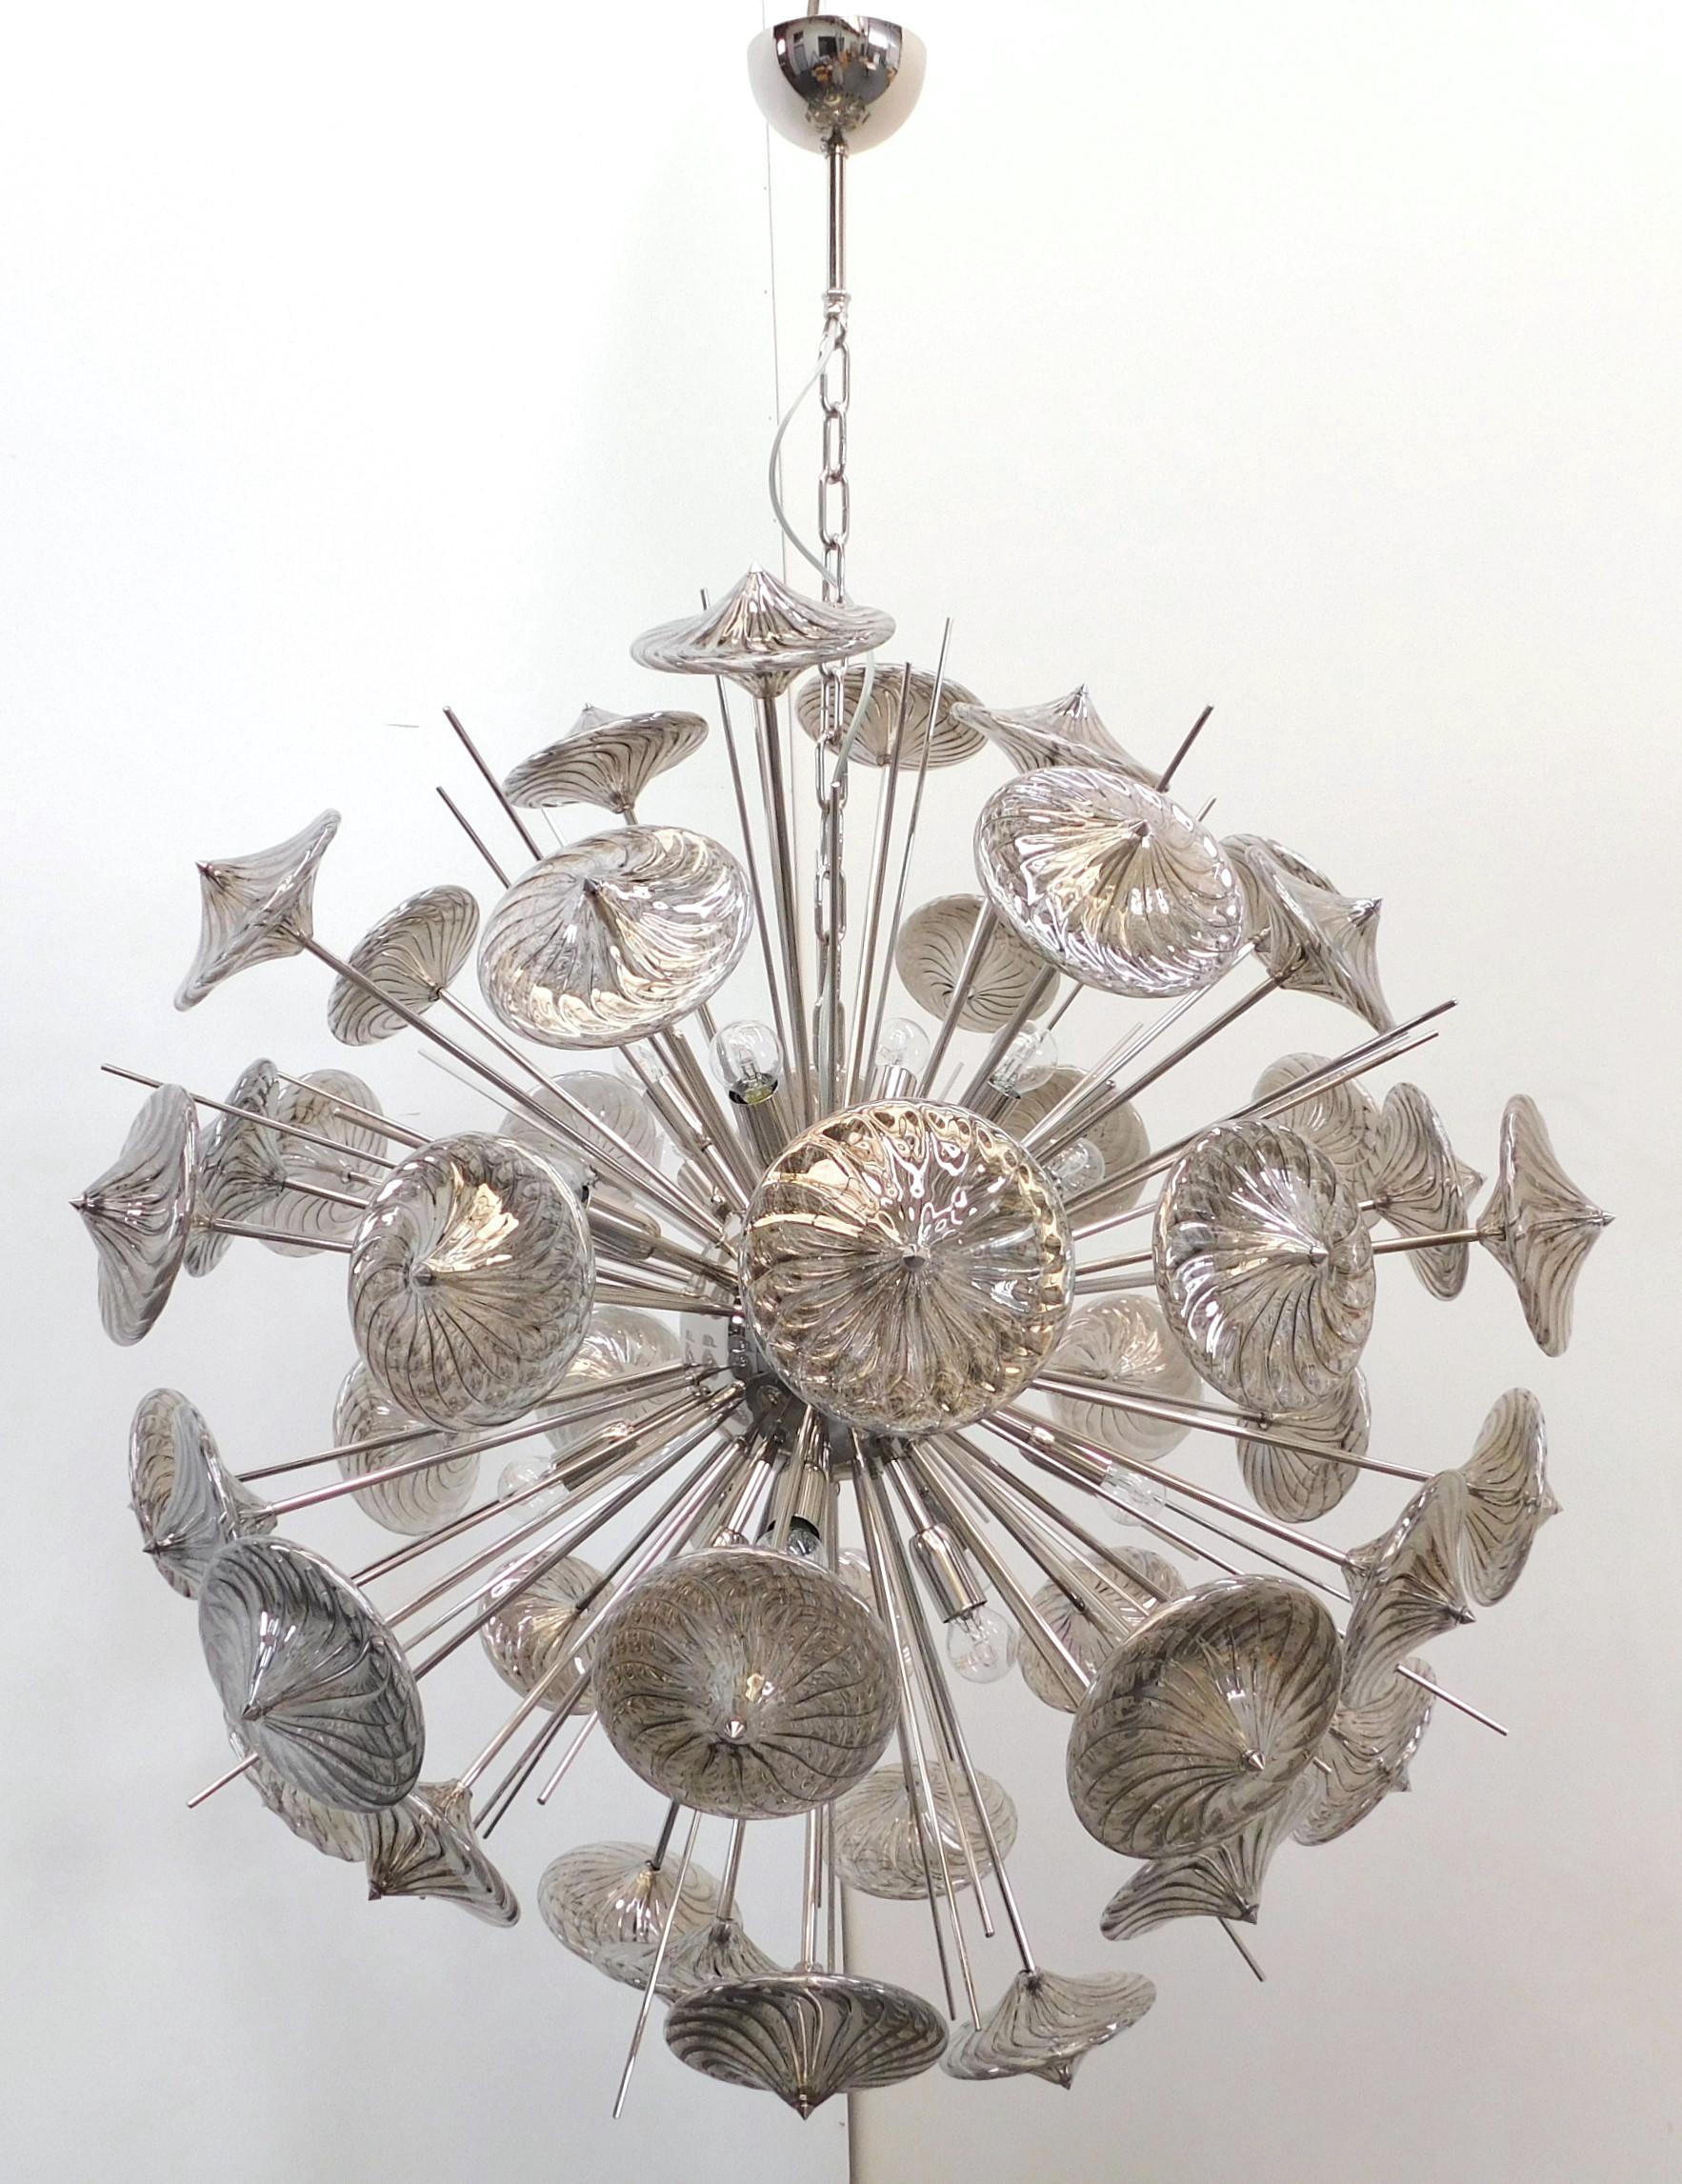 Italian modern Sputnik chandelier with smoky gray Pyrex borosilicate glass, hand blown to produce a spiraled effect mounted on polished nickel metal finish / Designed by Fabio Bergomi for Fabio Ltd / Made in Italy
16 lights / E26 or E27 type / max